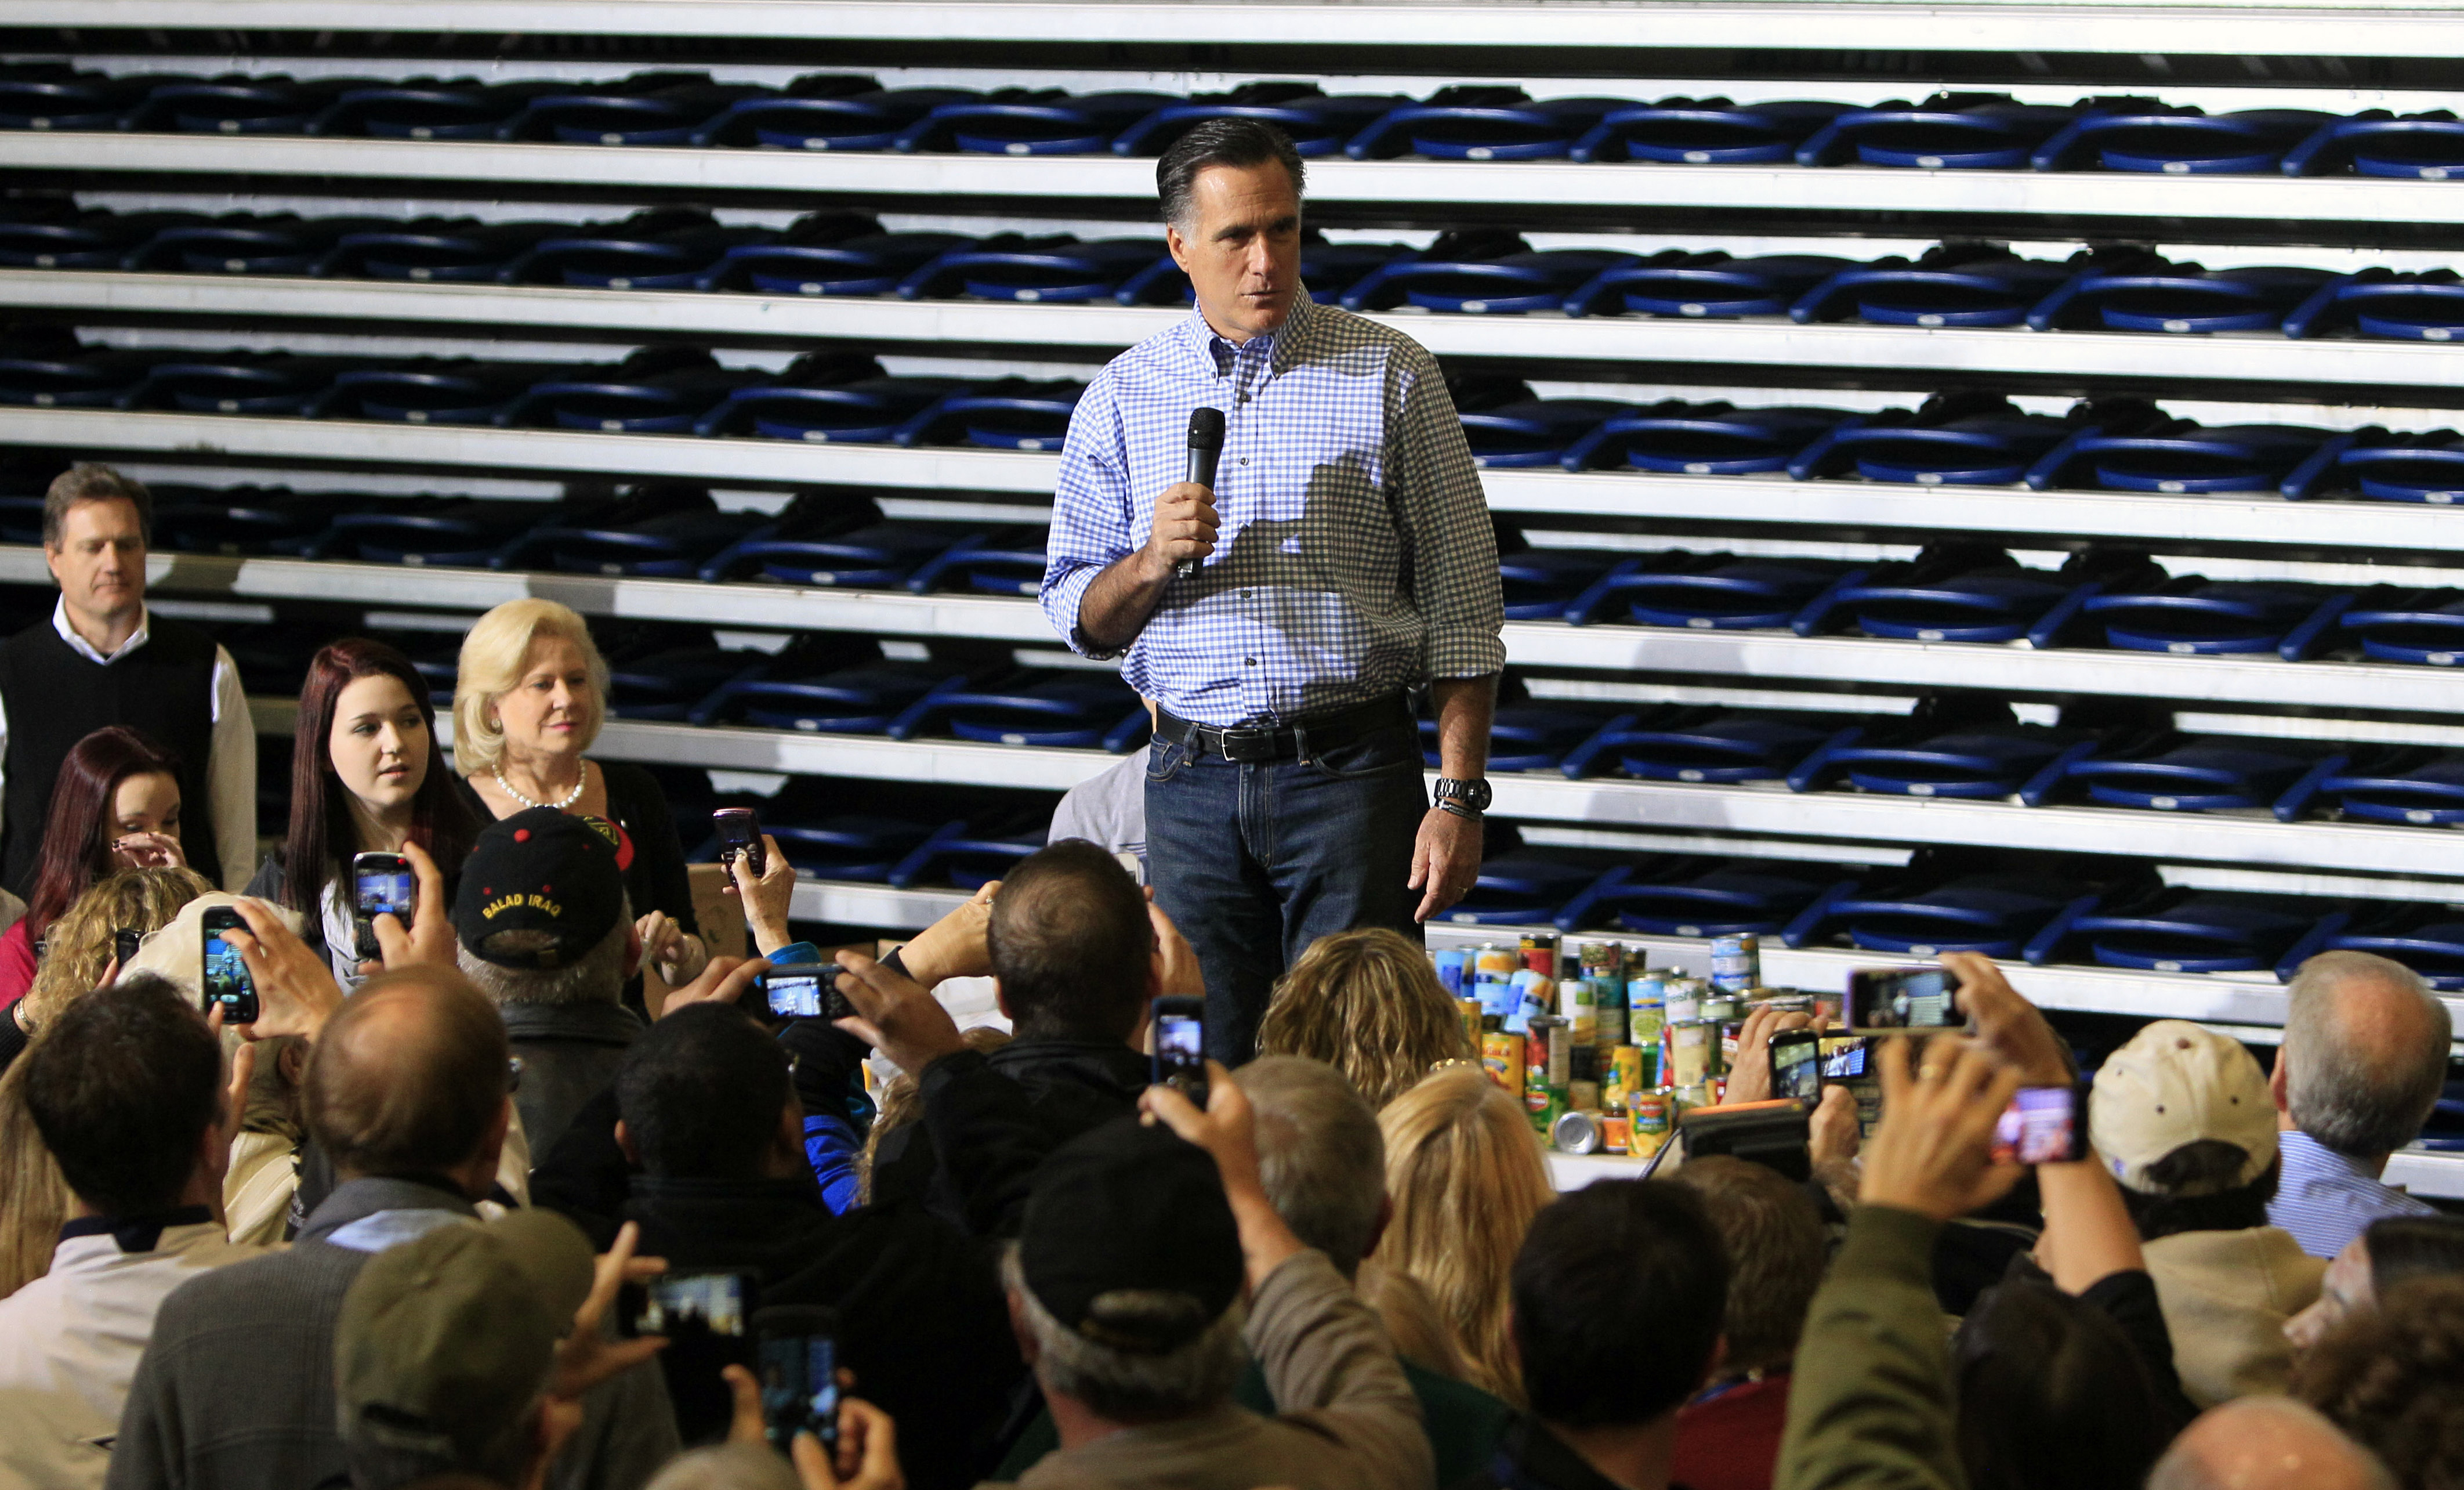 Romney rally turns into storm relief event - The Blade